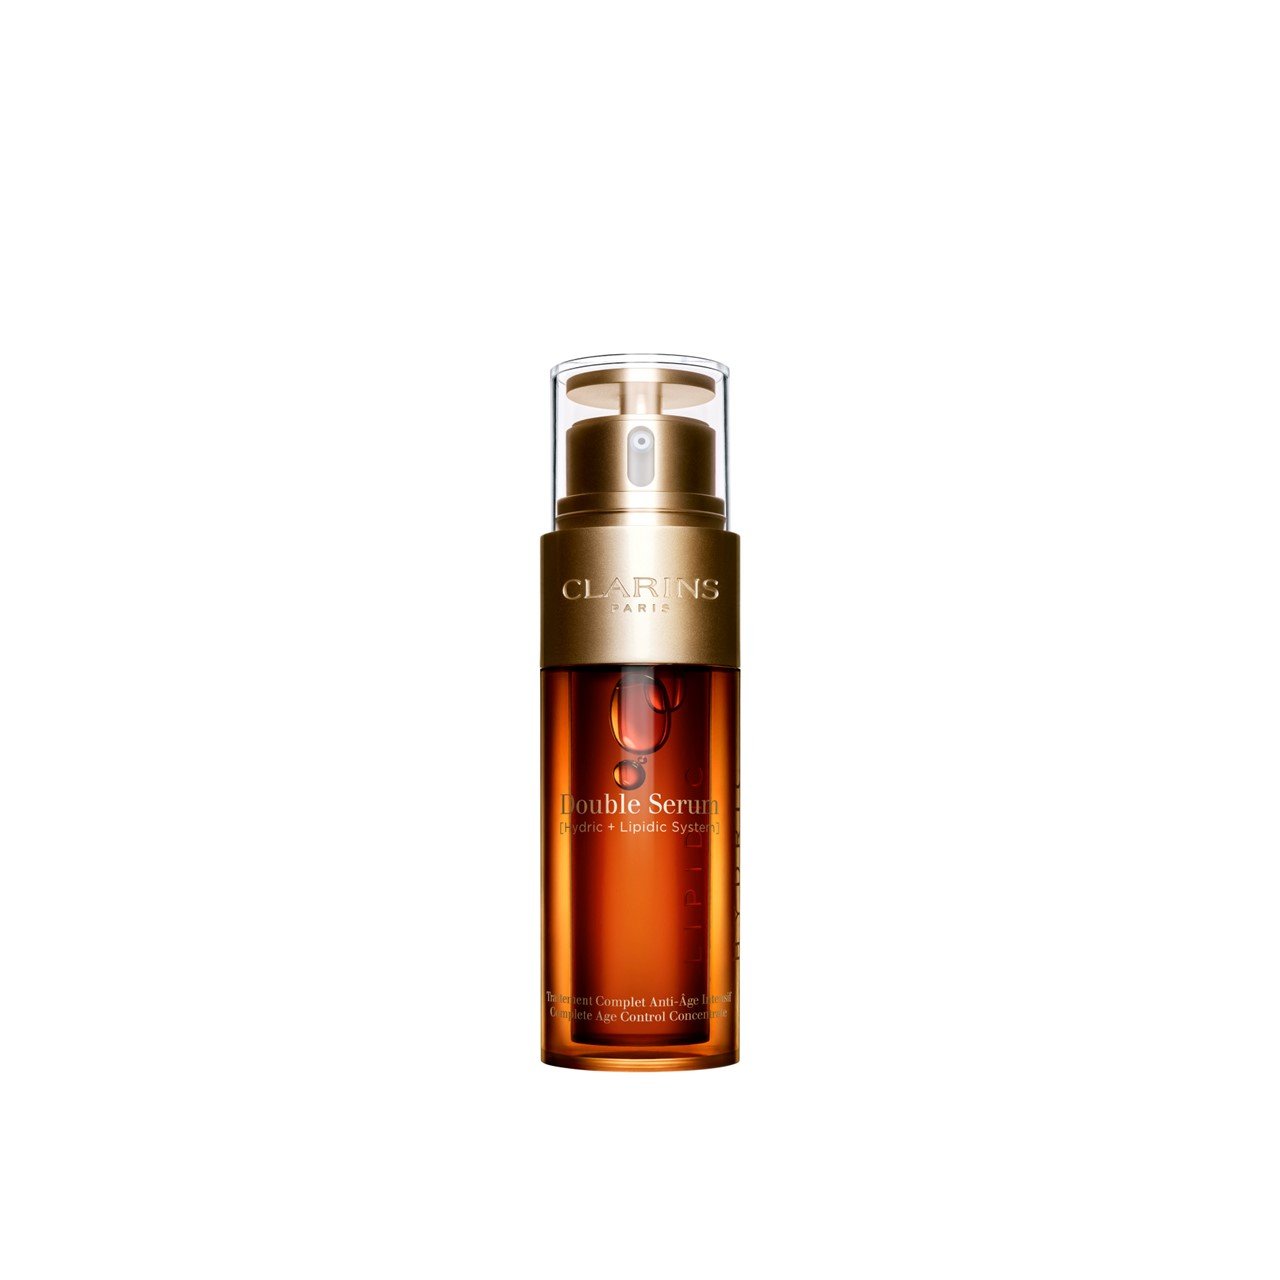 Clarins Double Serum Complete Age Control Concentrate 50ml (1.69fl oz)